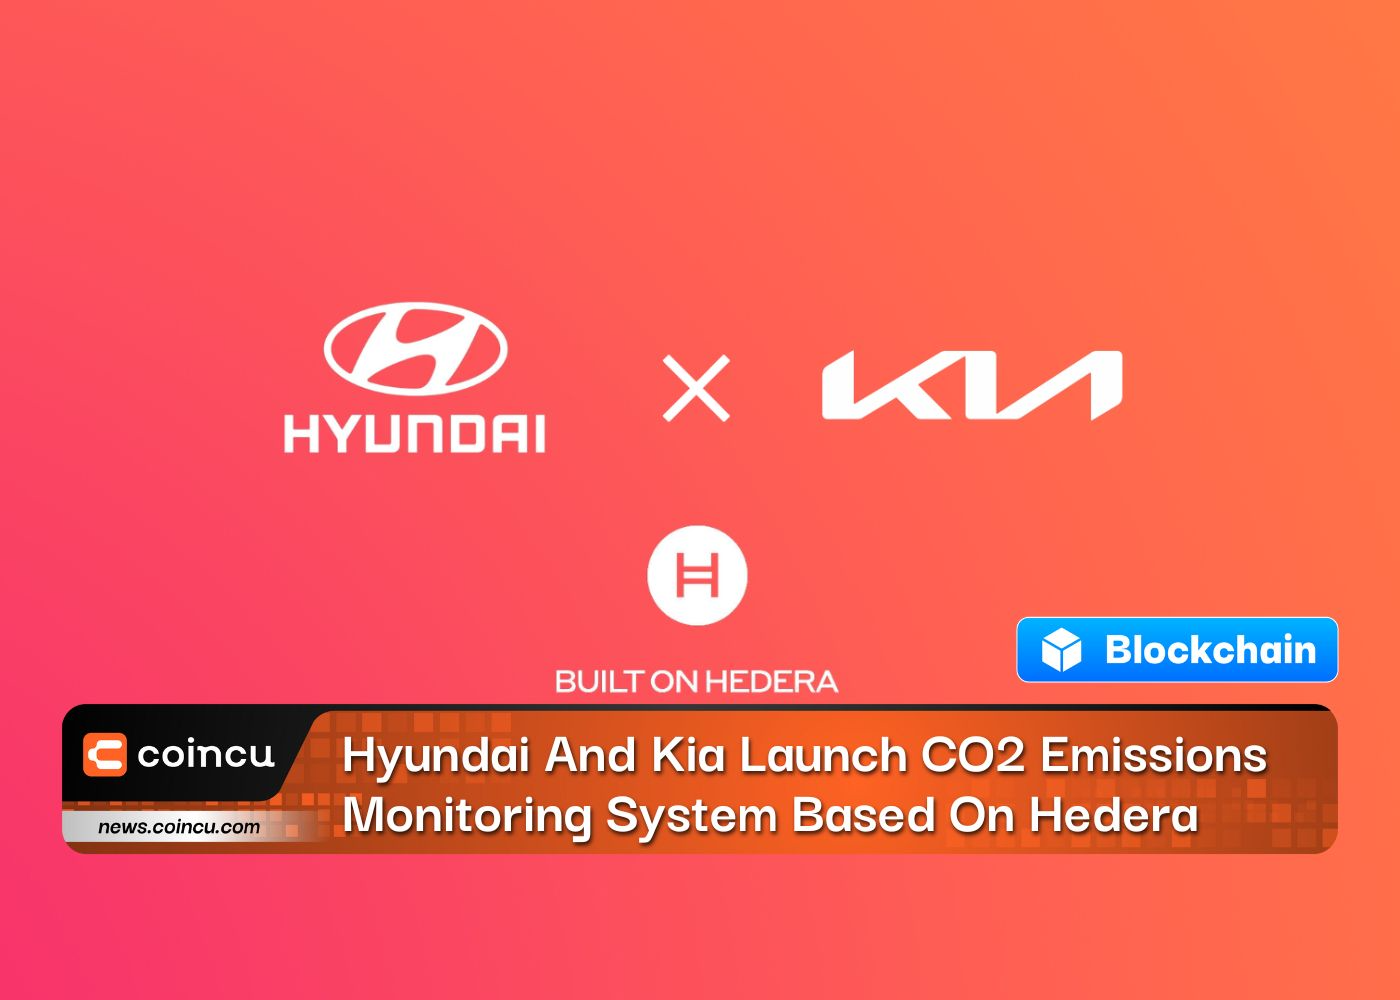 Hyundai And Kia Launch CO2 Emissions Monitoring System Based On Hedera